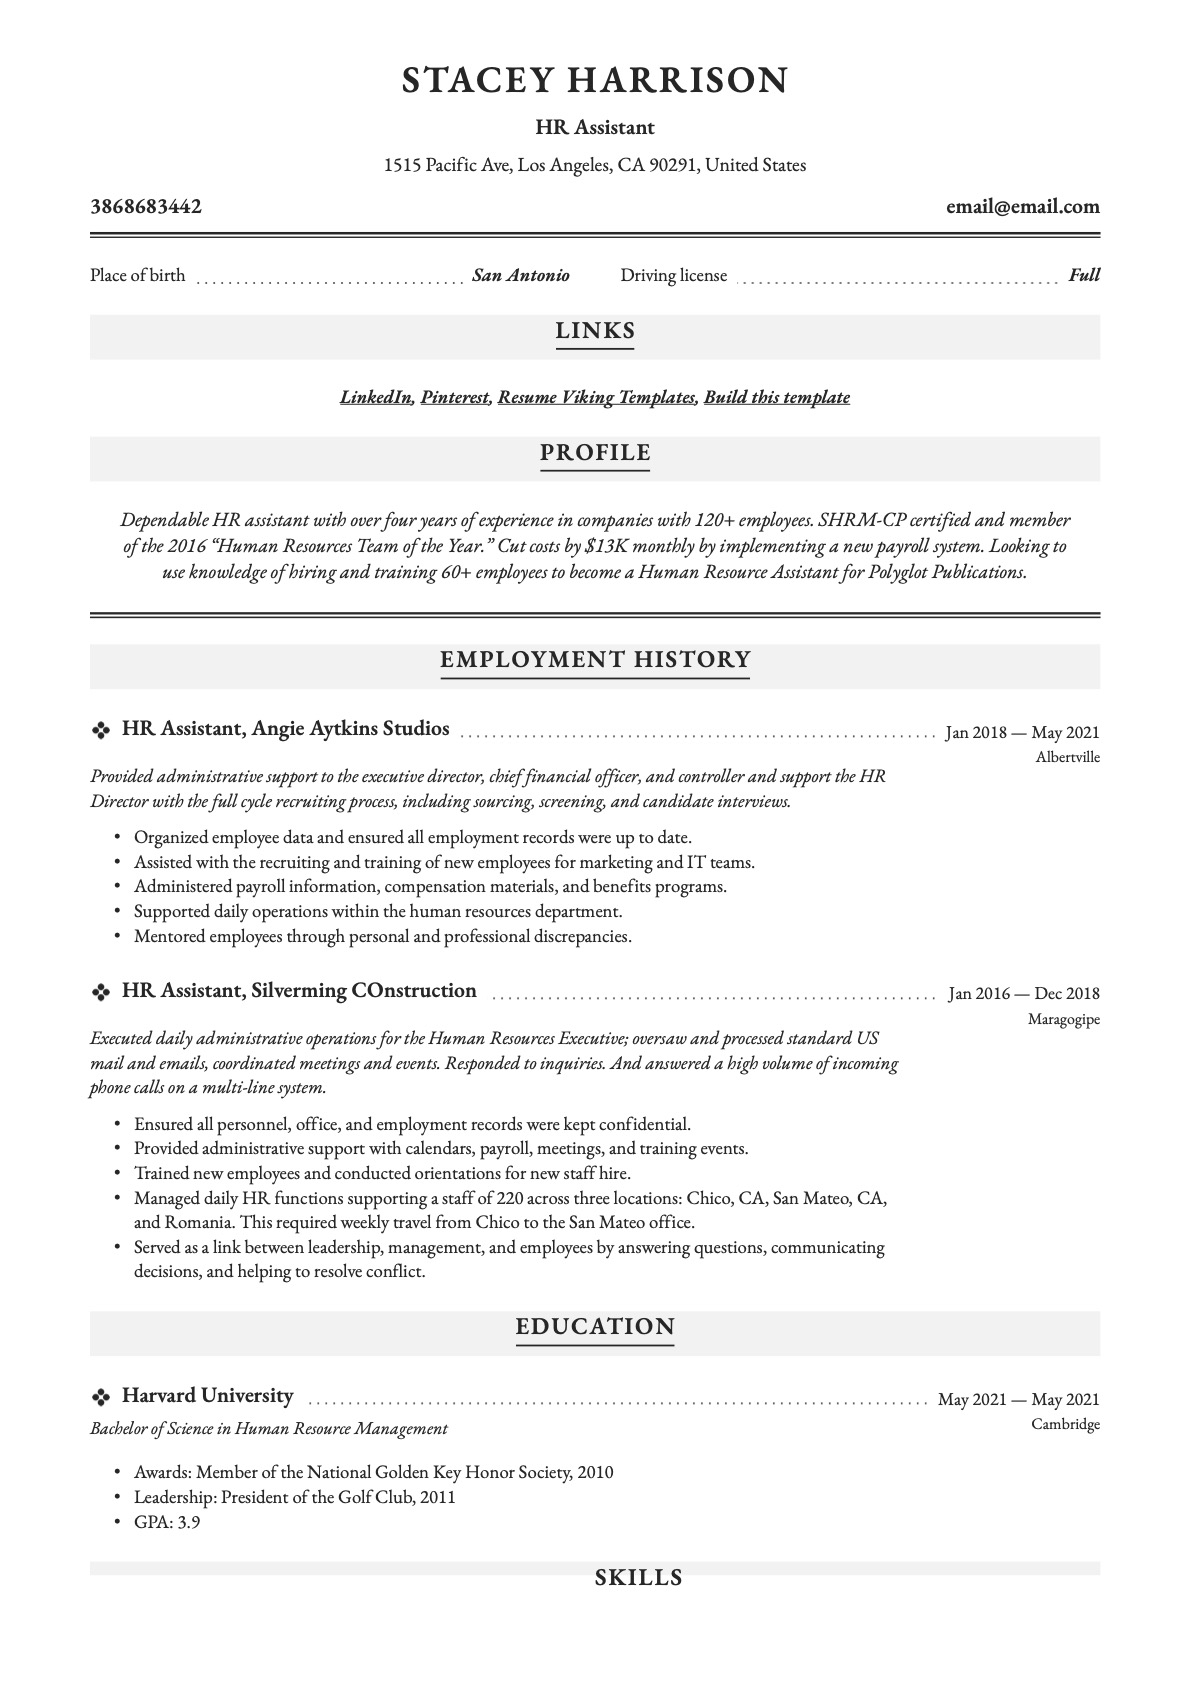 Professional HR Assistant Resume Example